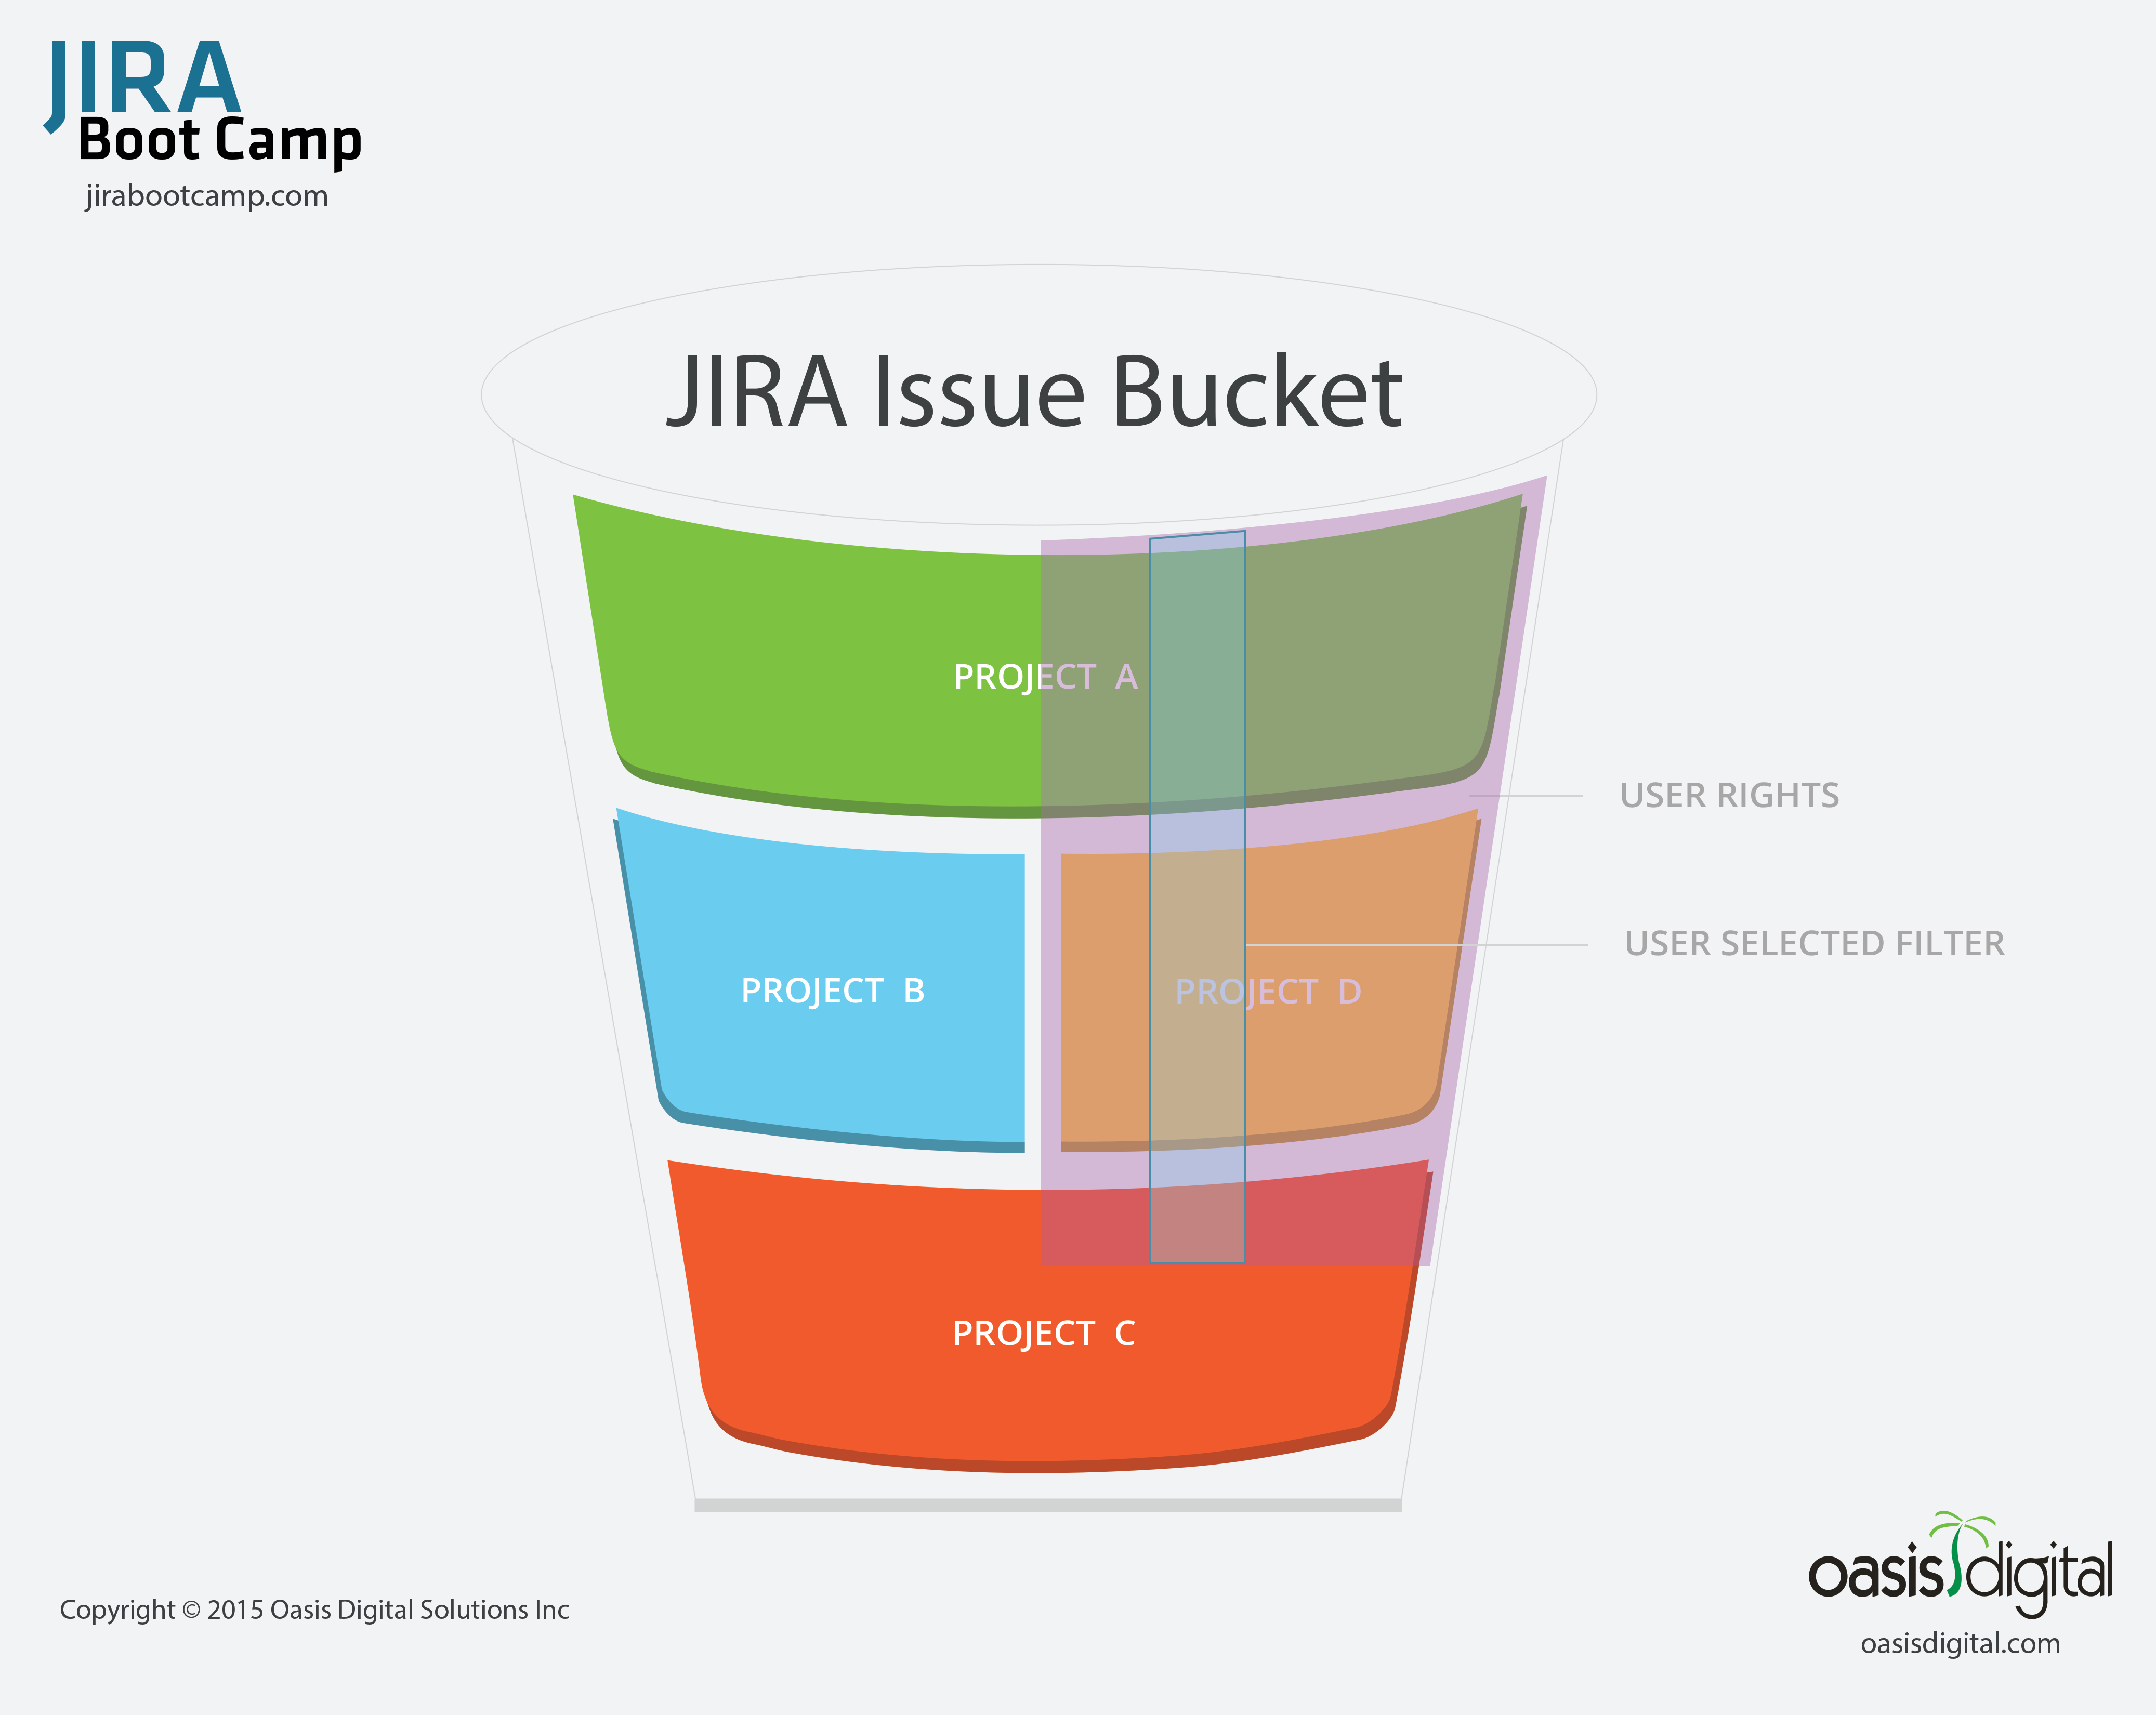 Filters are the “Language” of JIRA